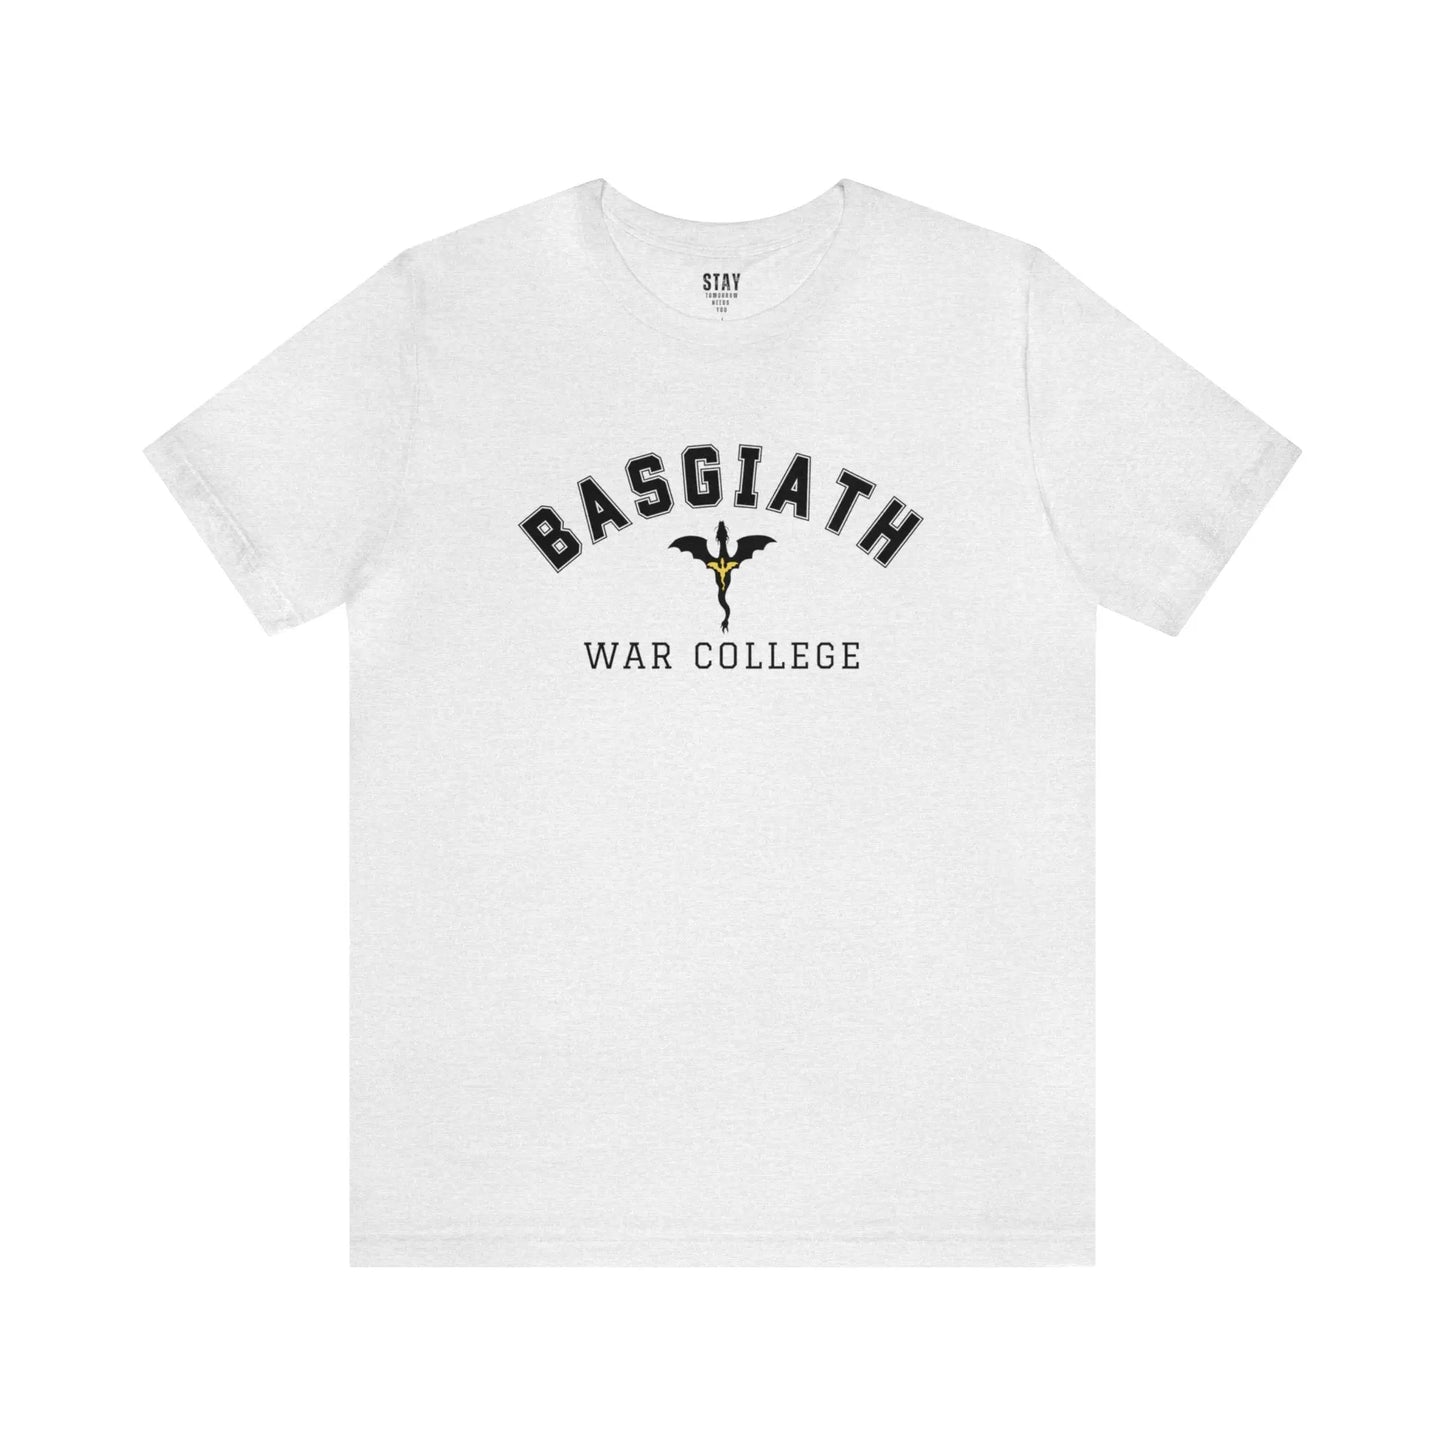 Basgiath War College Fourth Wing and Iron Flame T shirt inspired by Fourth Wing and Iron Flame by Rebecca Yarros - Stay Tomorrow Needs You